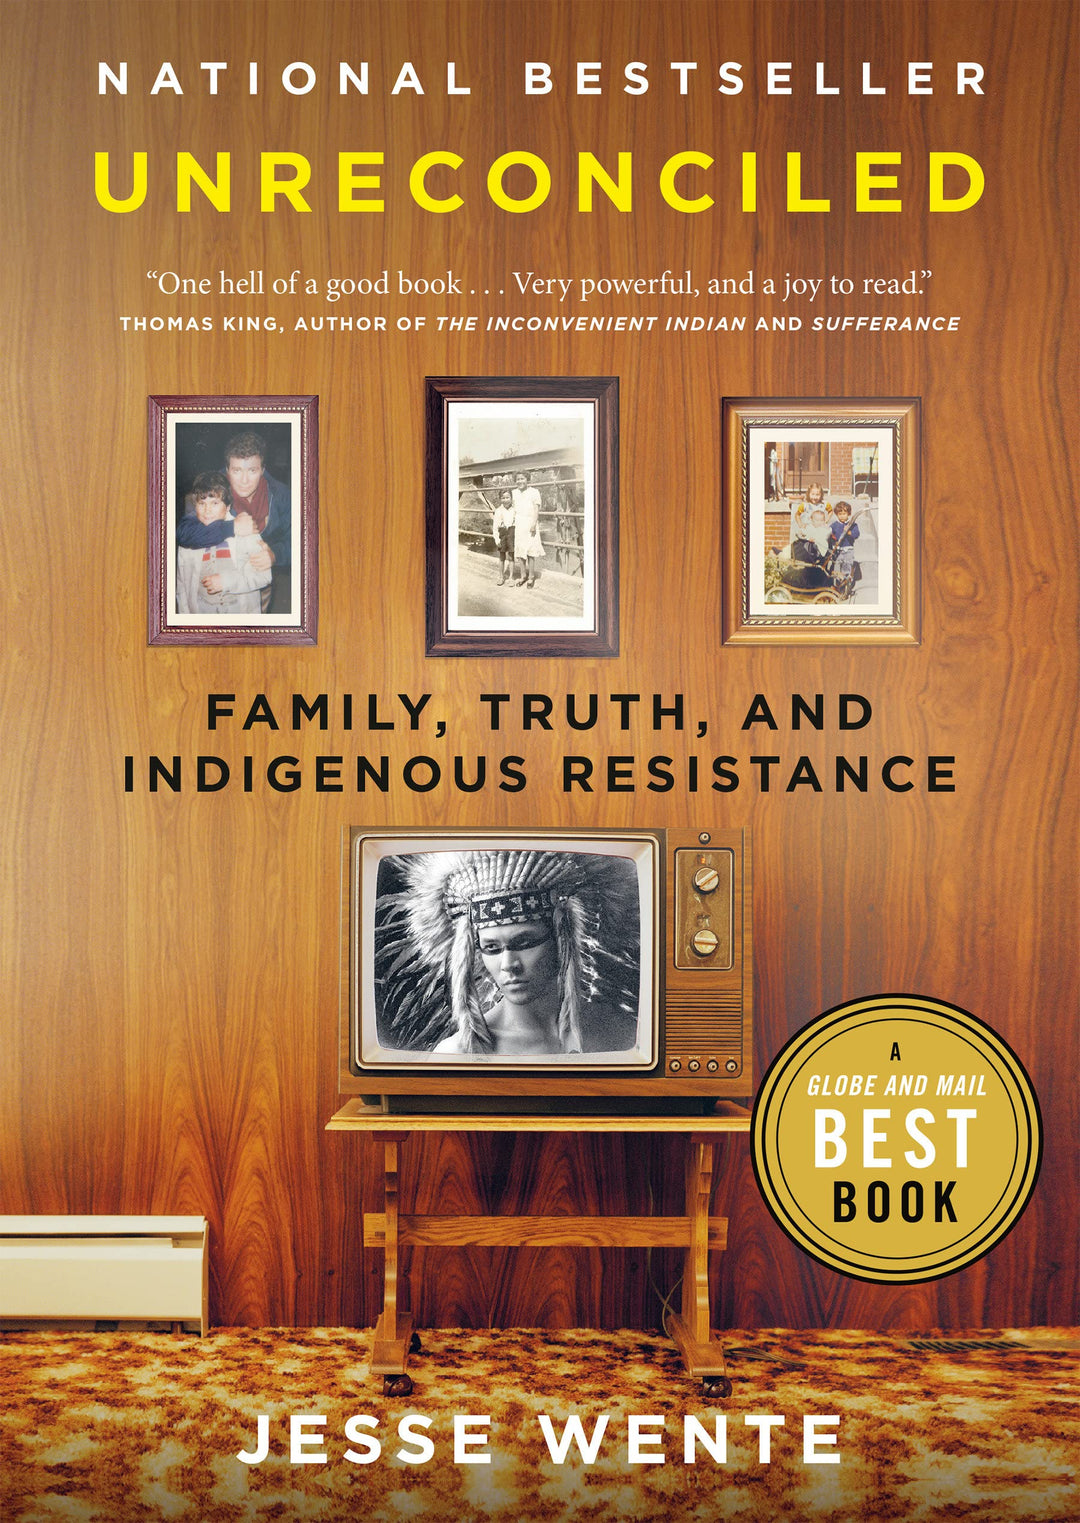 Unreconciled: Family, Truth, and Indigenous Resistance by Jesse Wente